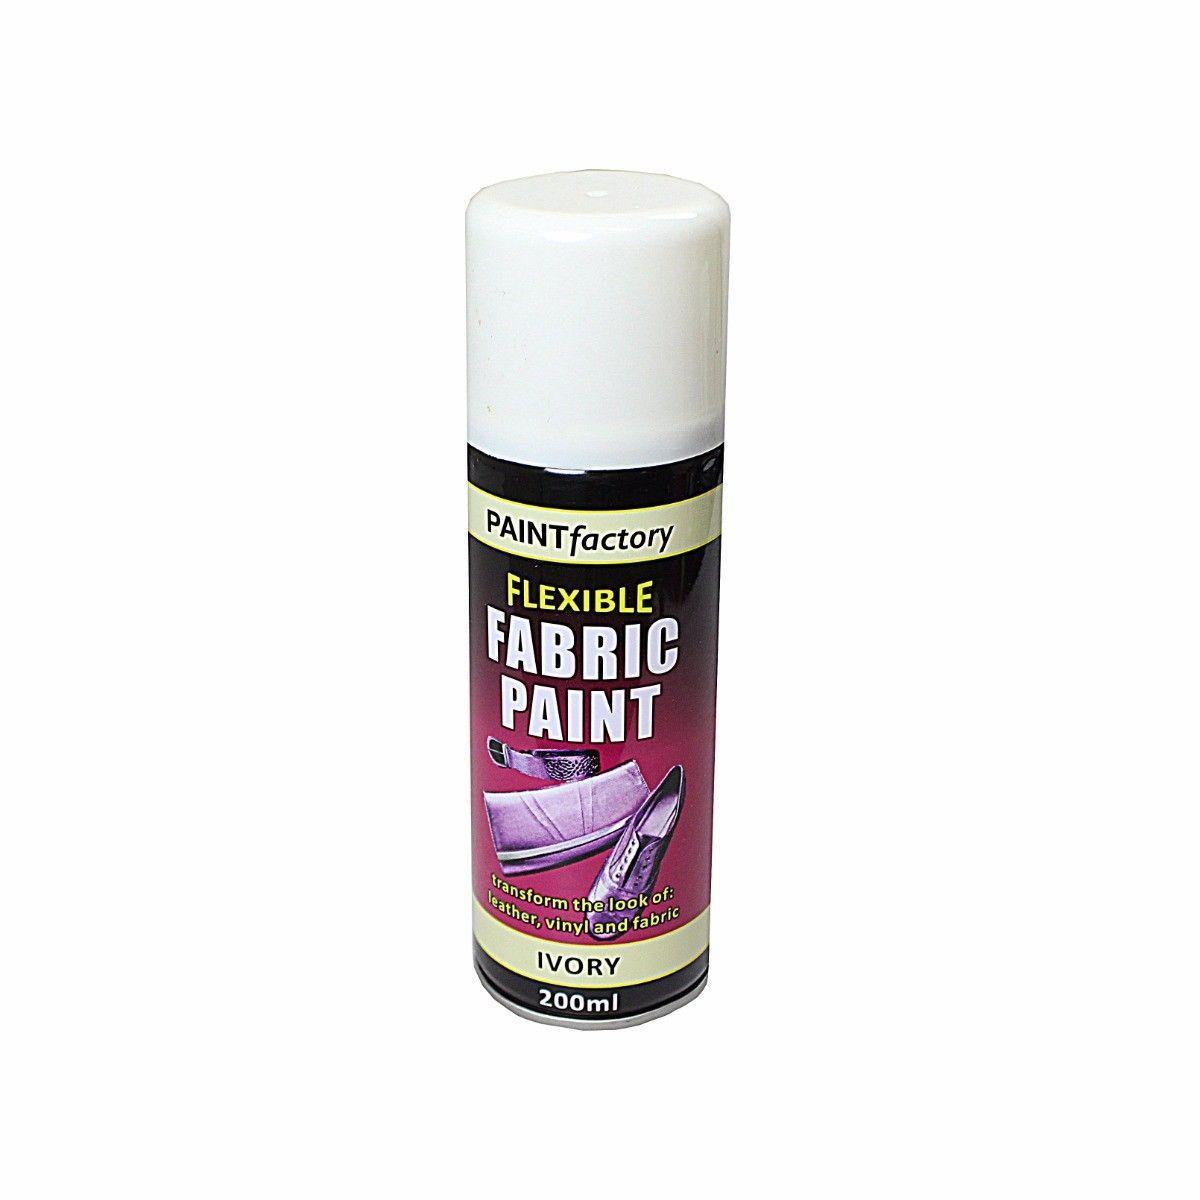 Paint Factory Flexible Fabric Spray Paint Ivory Suitable For Leather Vinyl And Most Fabrics 200ml 1070 (Parcel Rate)